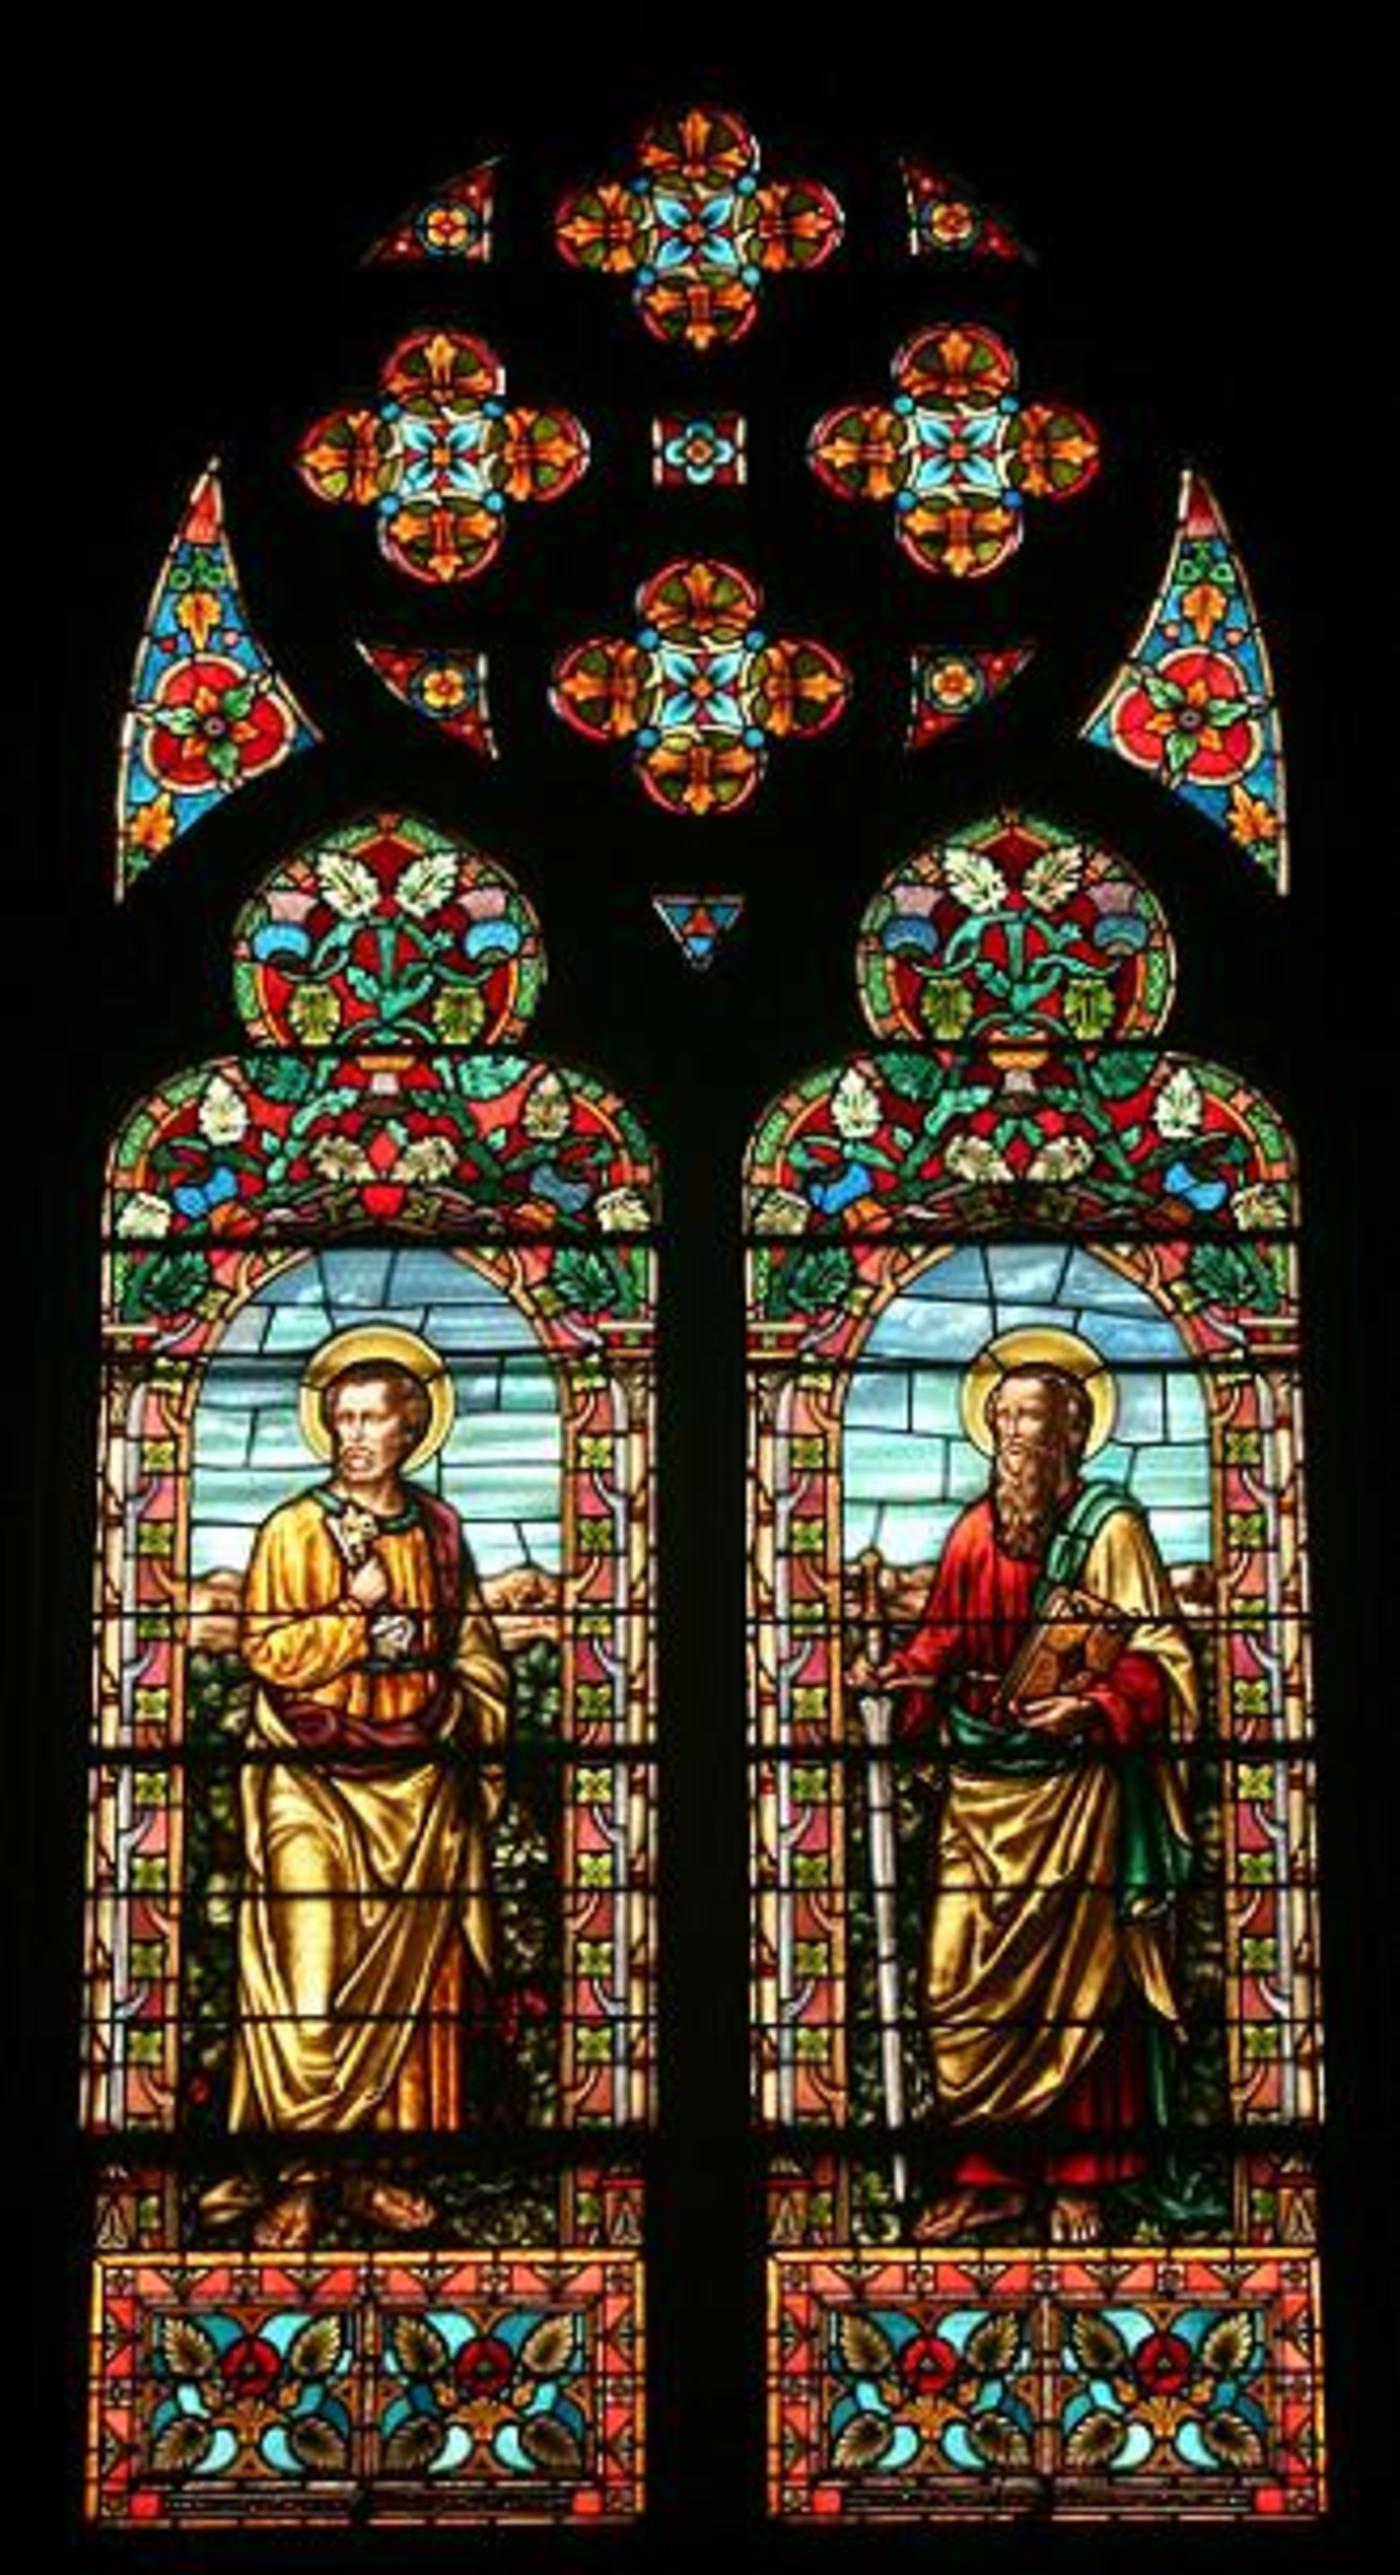 Windows 10A and 10B: St. Peter and St. Paul